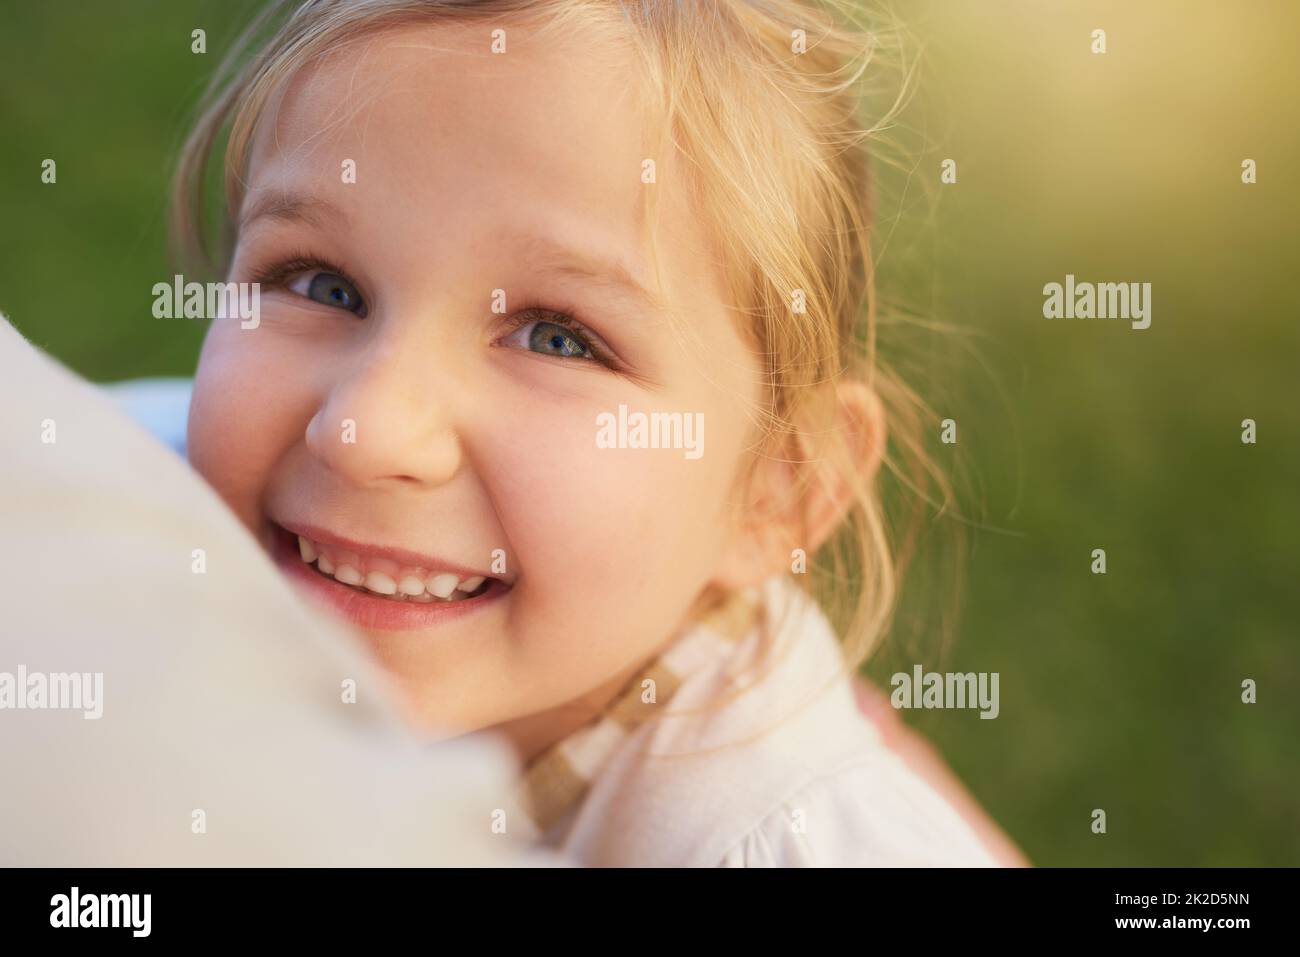 The joys of being a kid. Portrait of a cute little girl enjoying the day outside. Stock Photo